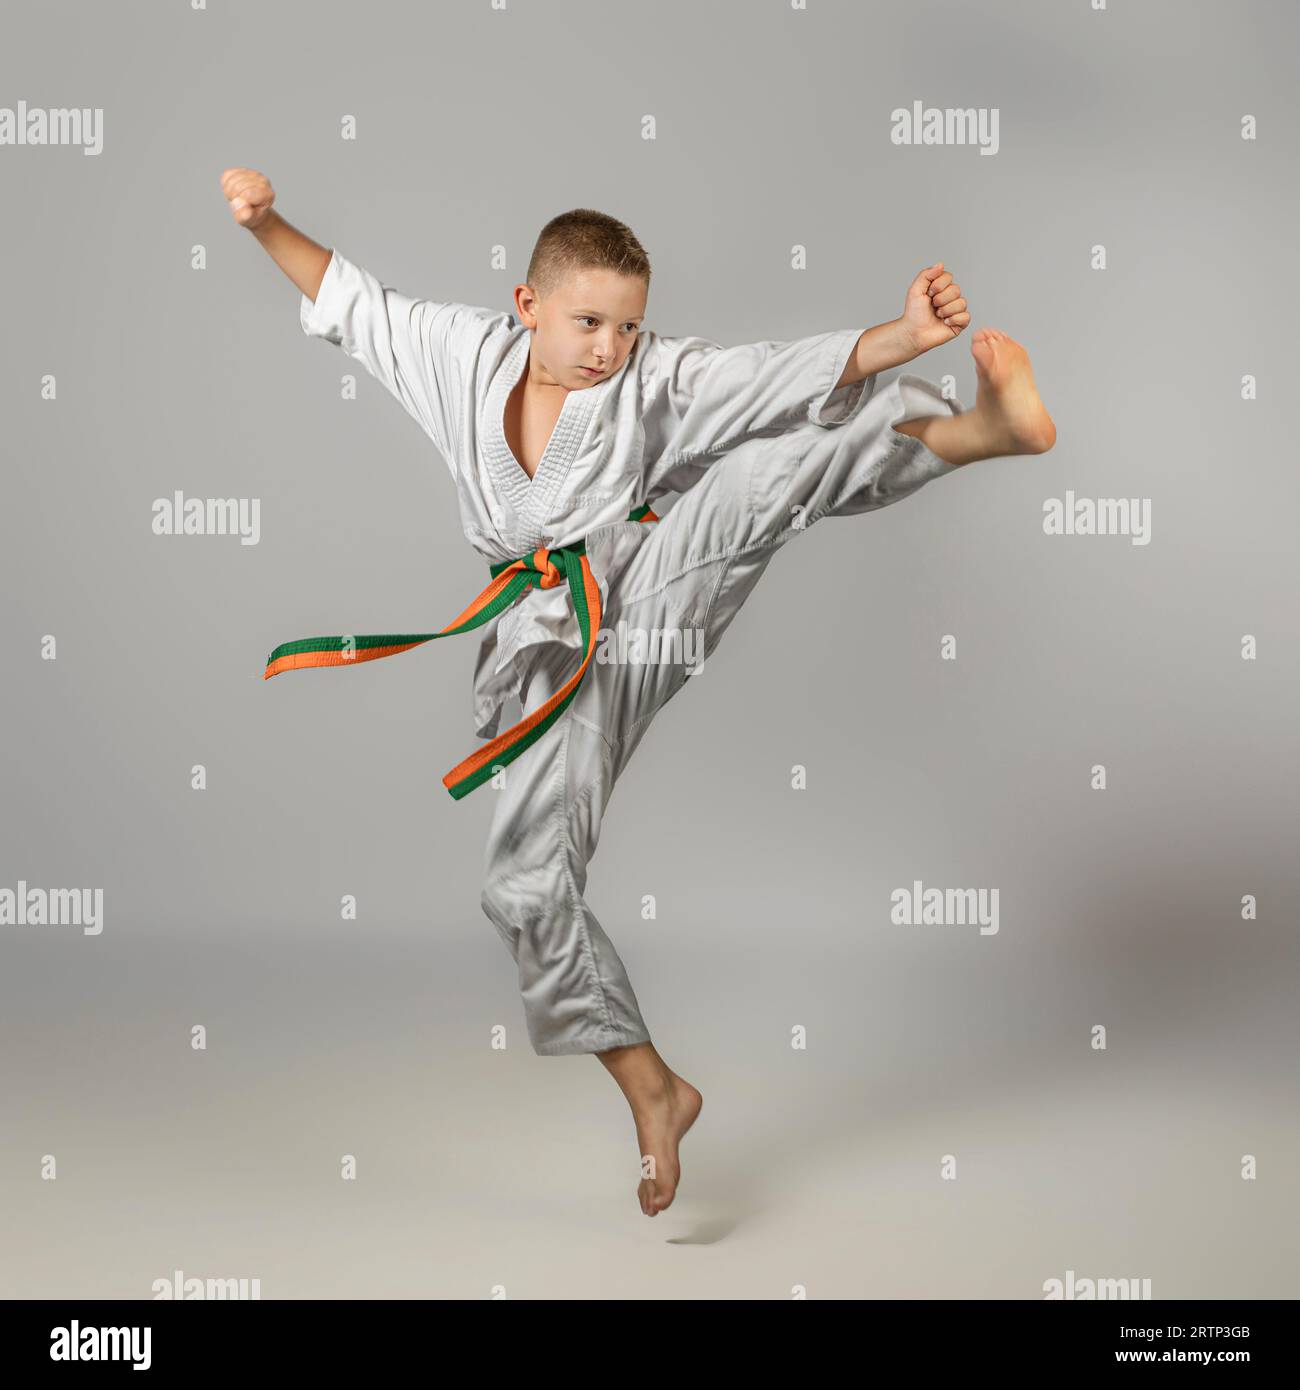 Caucasian boy practices martial arts and practises jumping Stock Photo